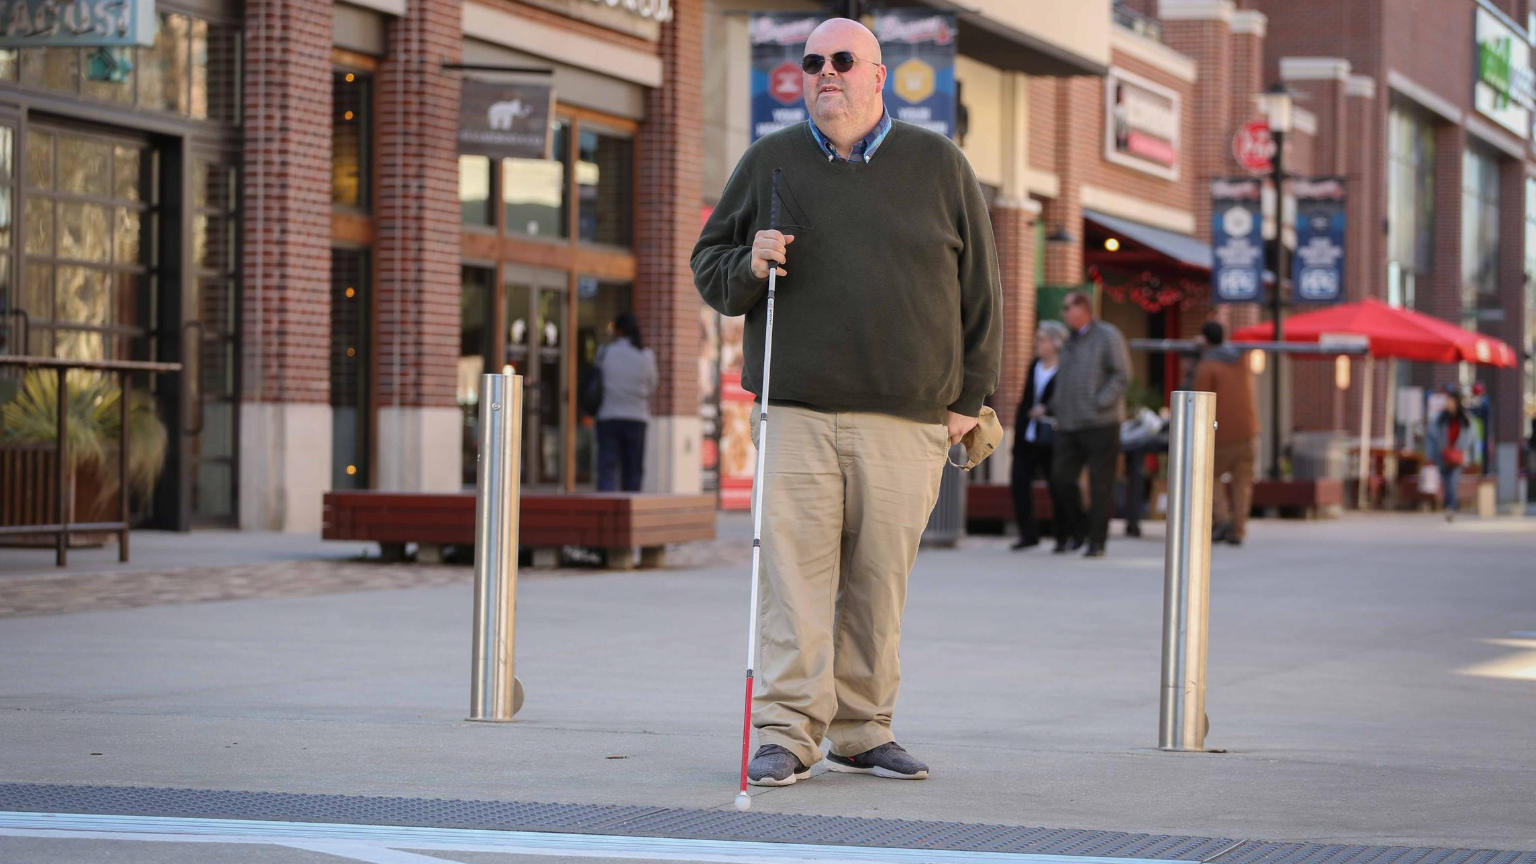 A blind man using a cane to navigate independently.